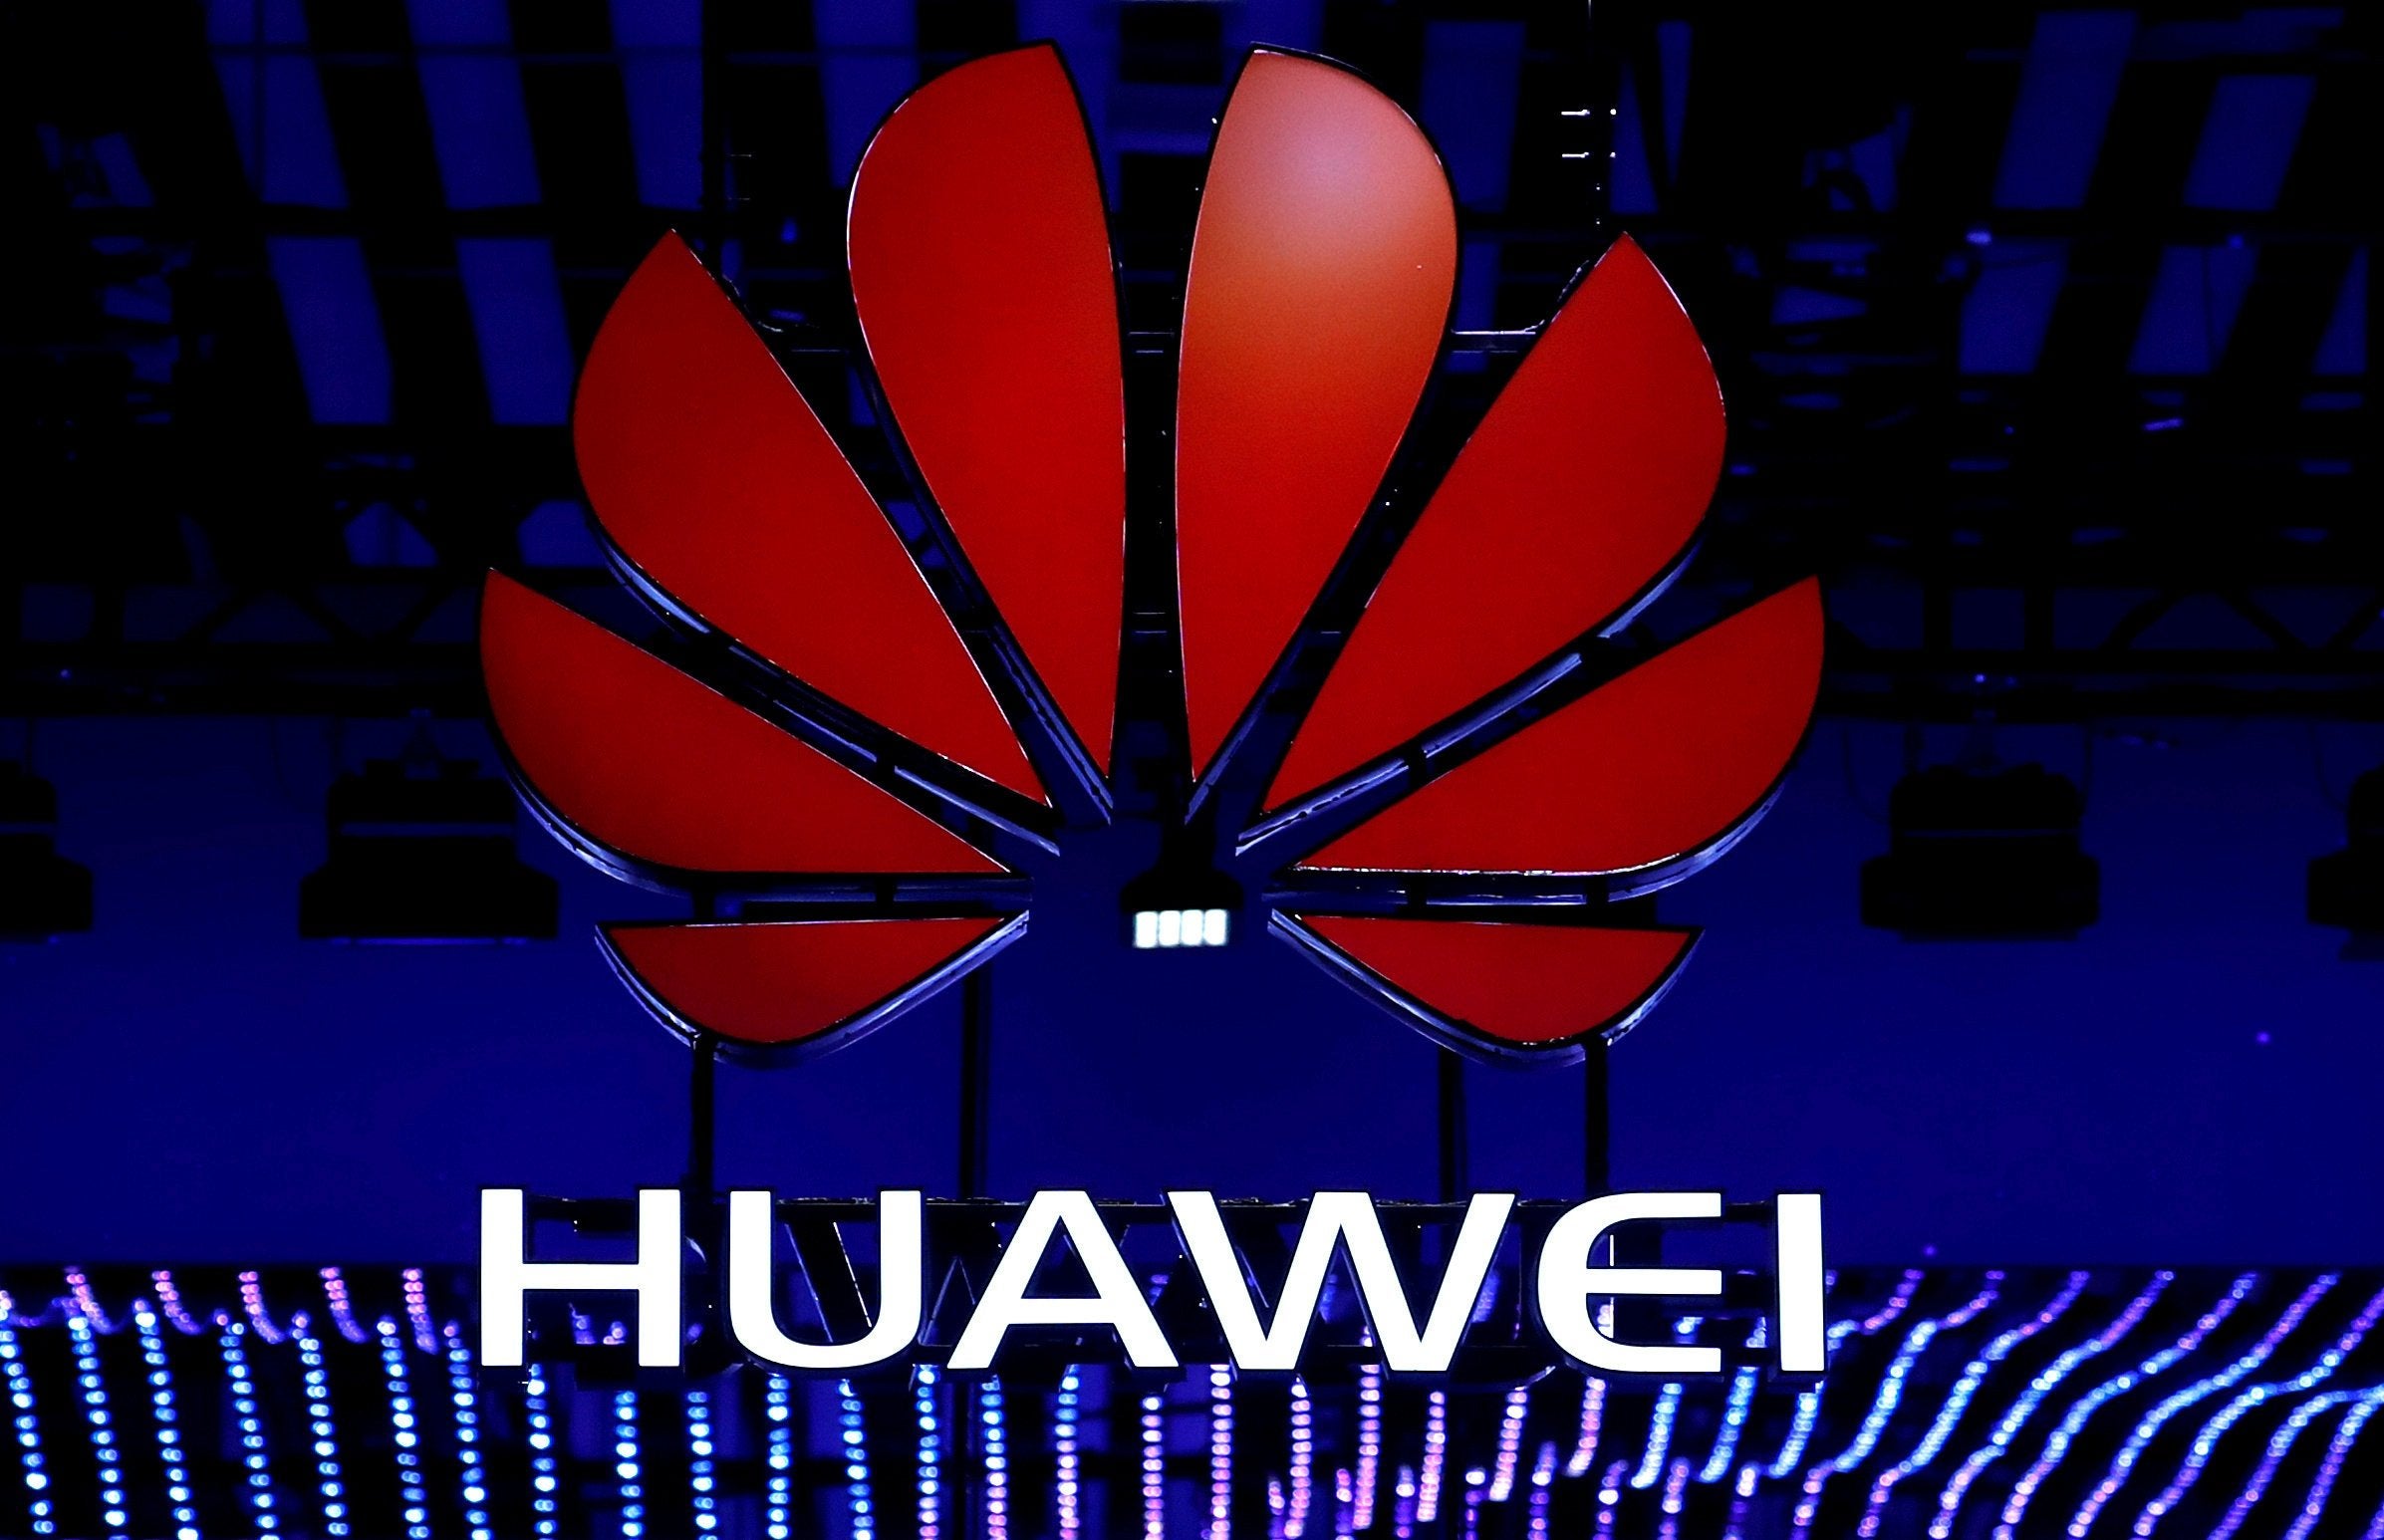 Huawei: The Chinese economic champion has come under pressure from Western Governments worried about security